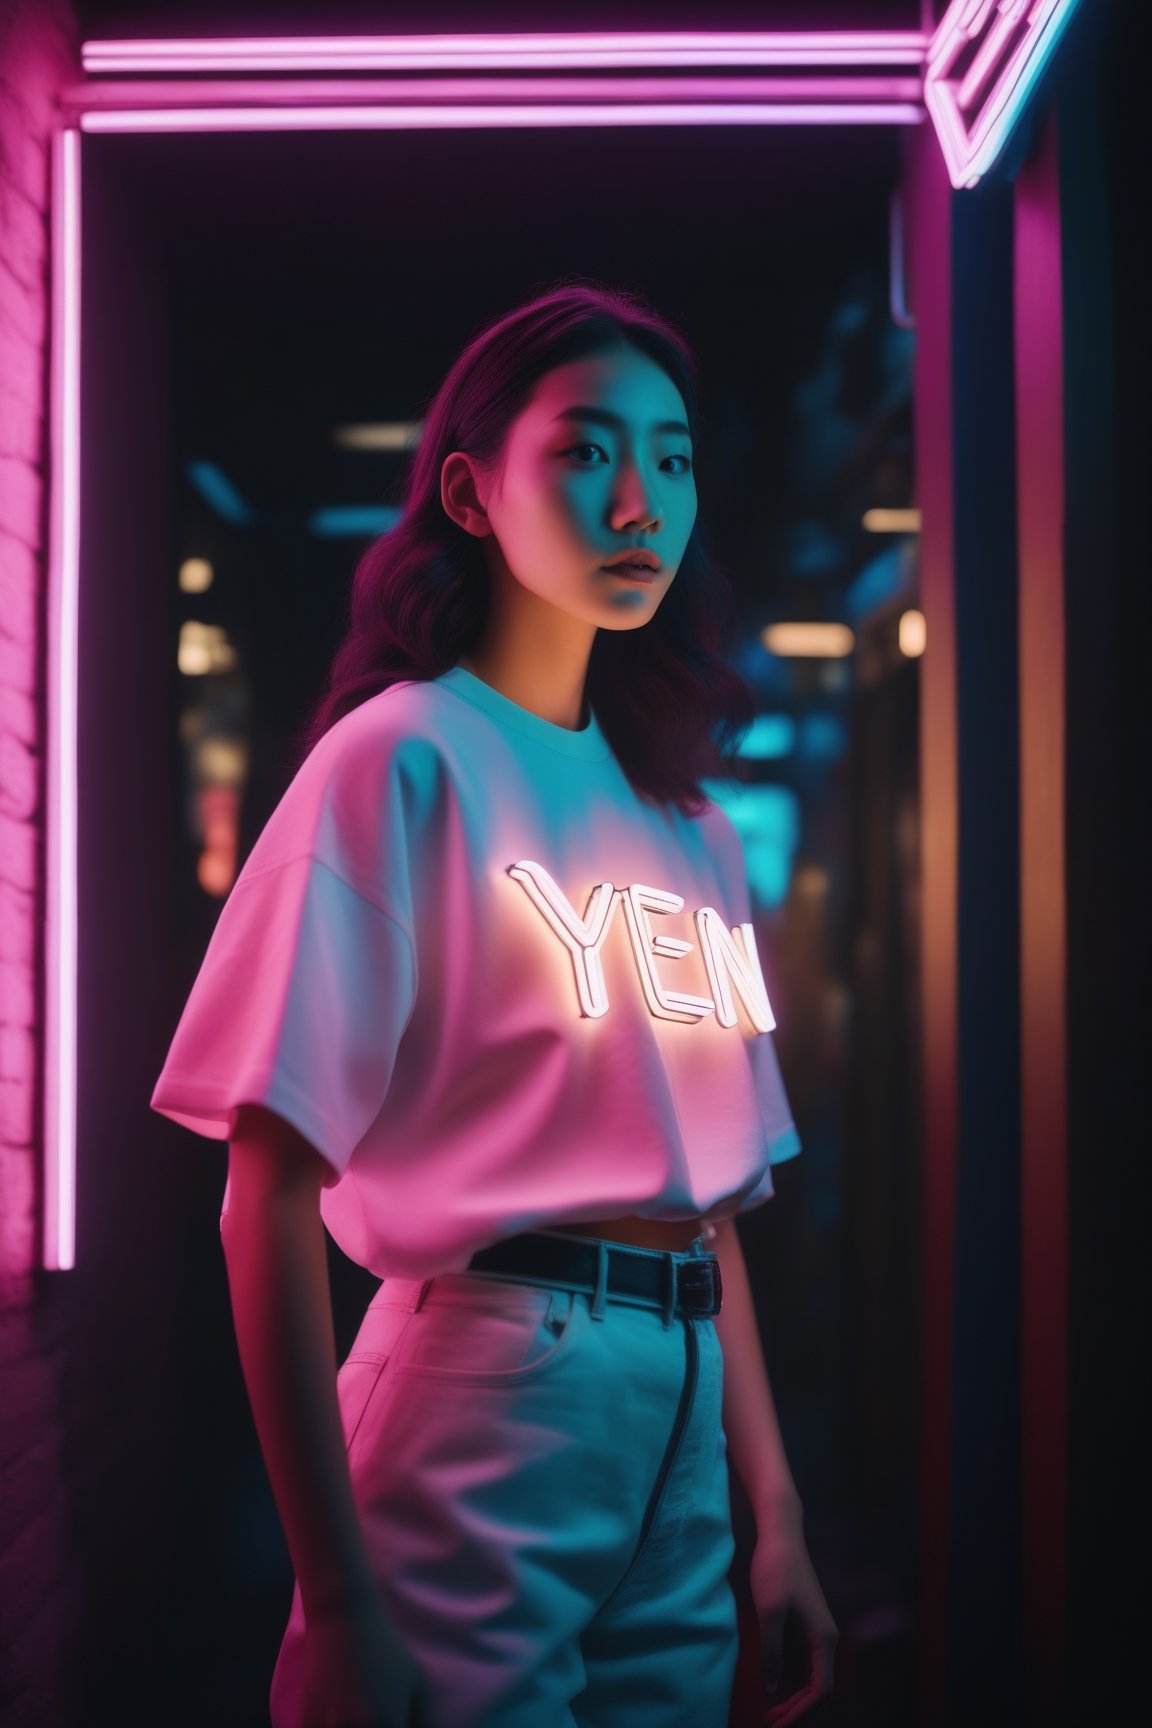  A young woman holding a neon sign that says "YEN" realism, casual creative fashion cinematic outfit photo, cinematic pastel lighting, 80s neon movie still, 